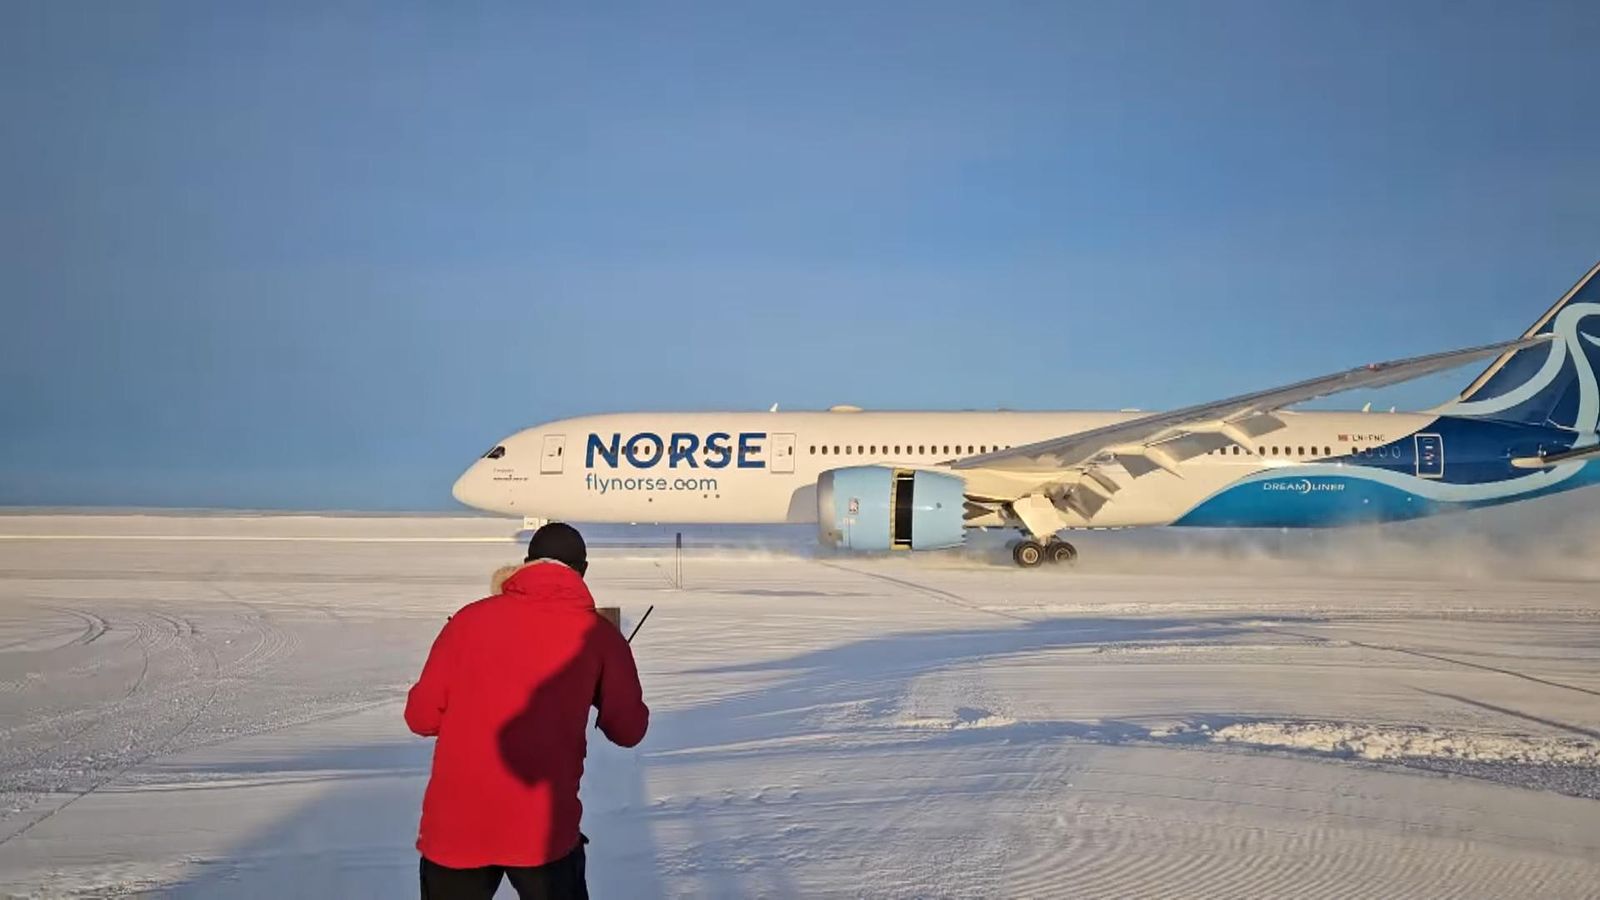 A team of scientists broke new ground when a plane capable of carrying more than 300 passengers landed in Antarctica, with aviators hailing it as a wo